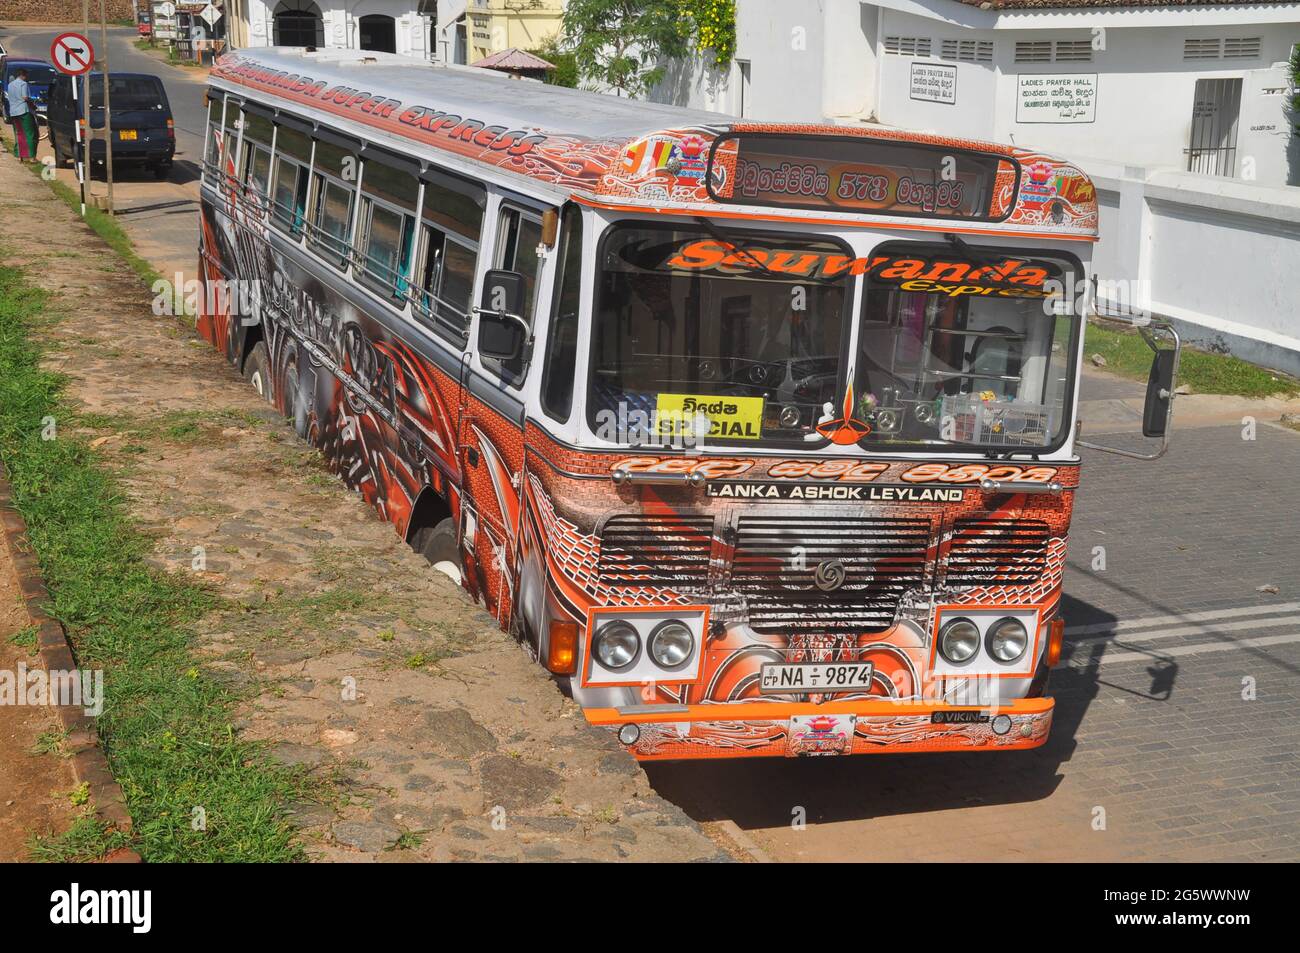 Decorated and painted bus in Galle, Sri Lanka. Stock Photo